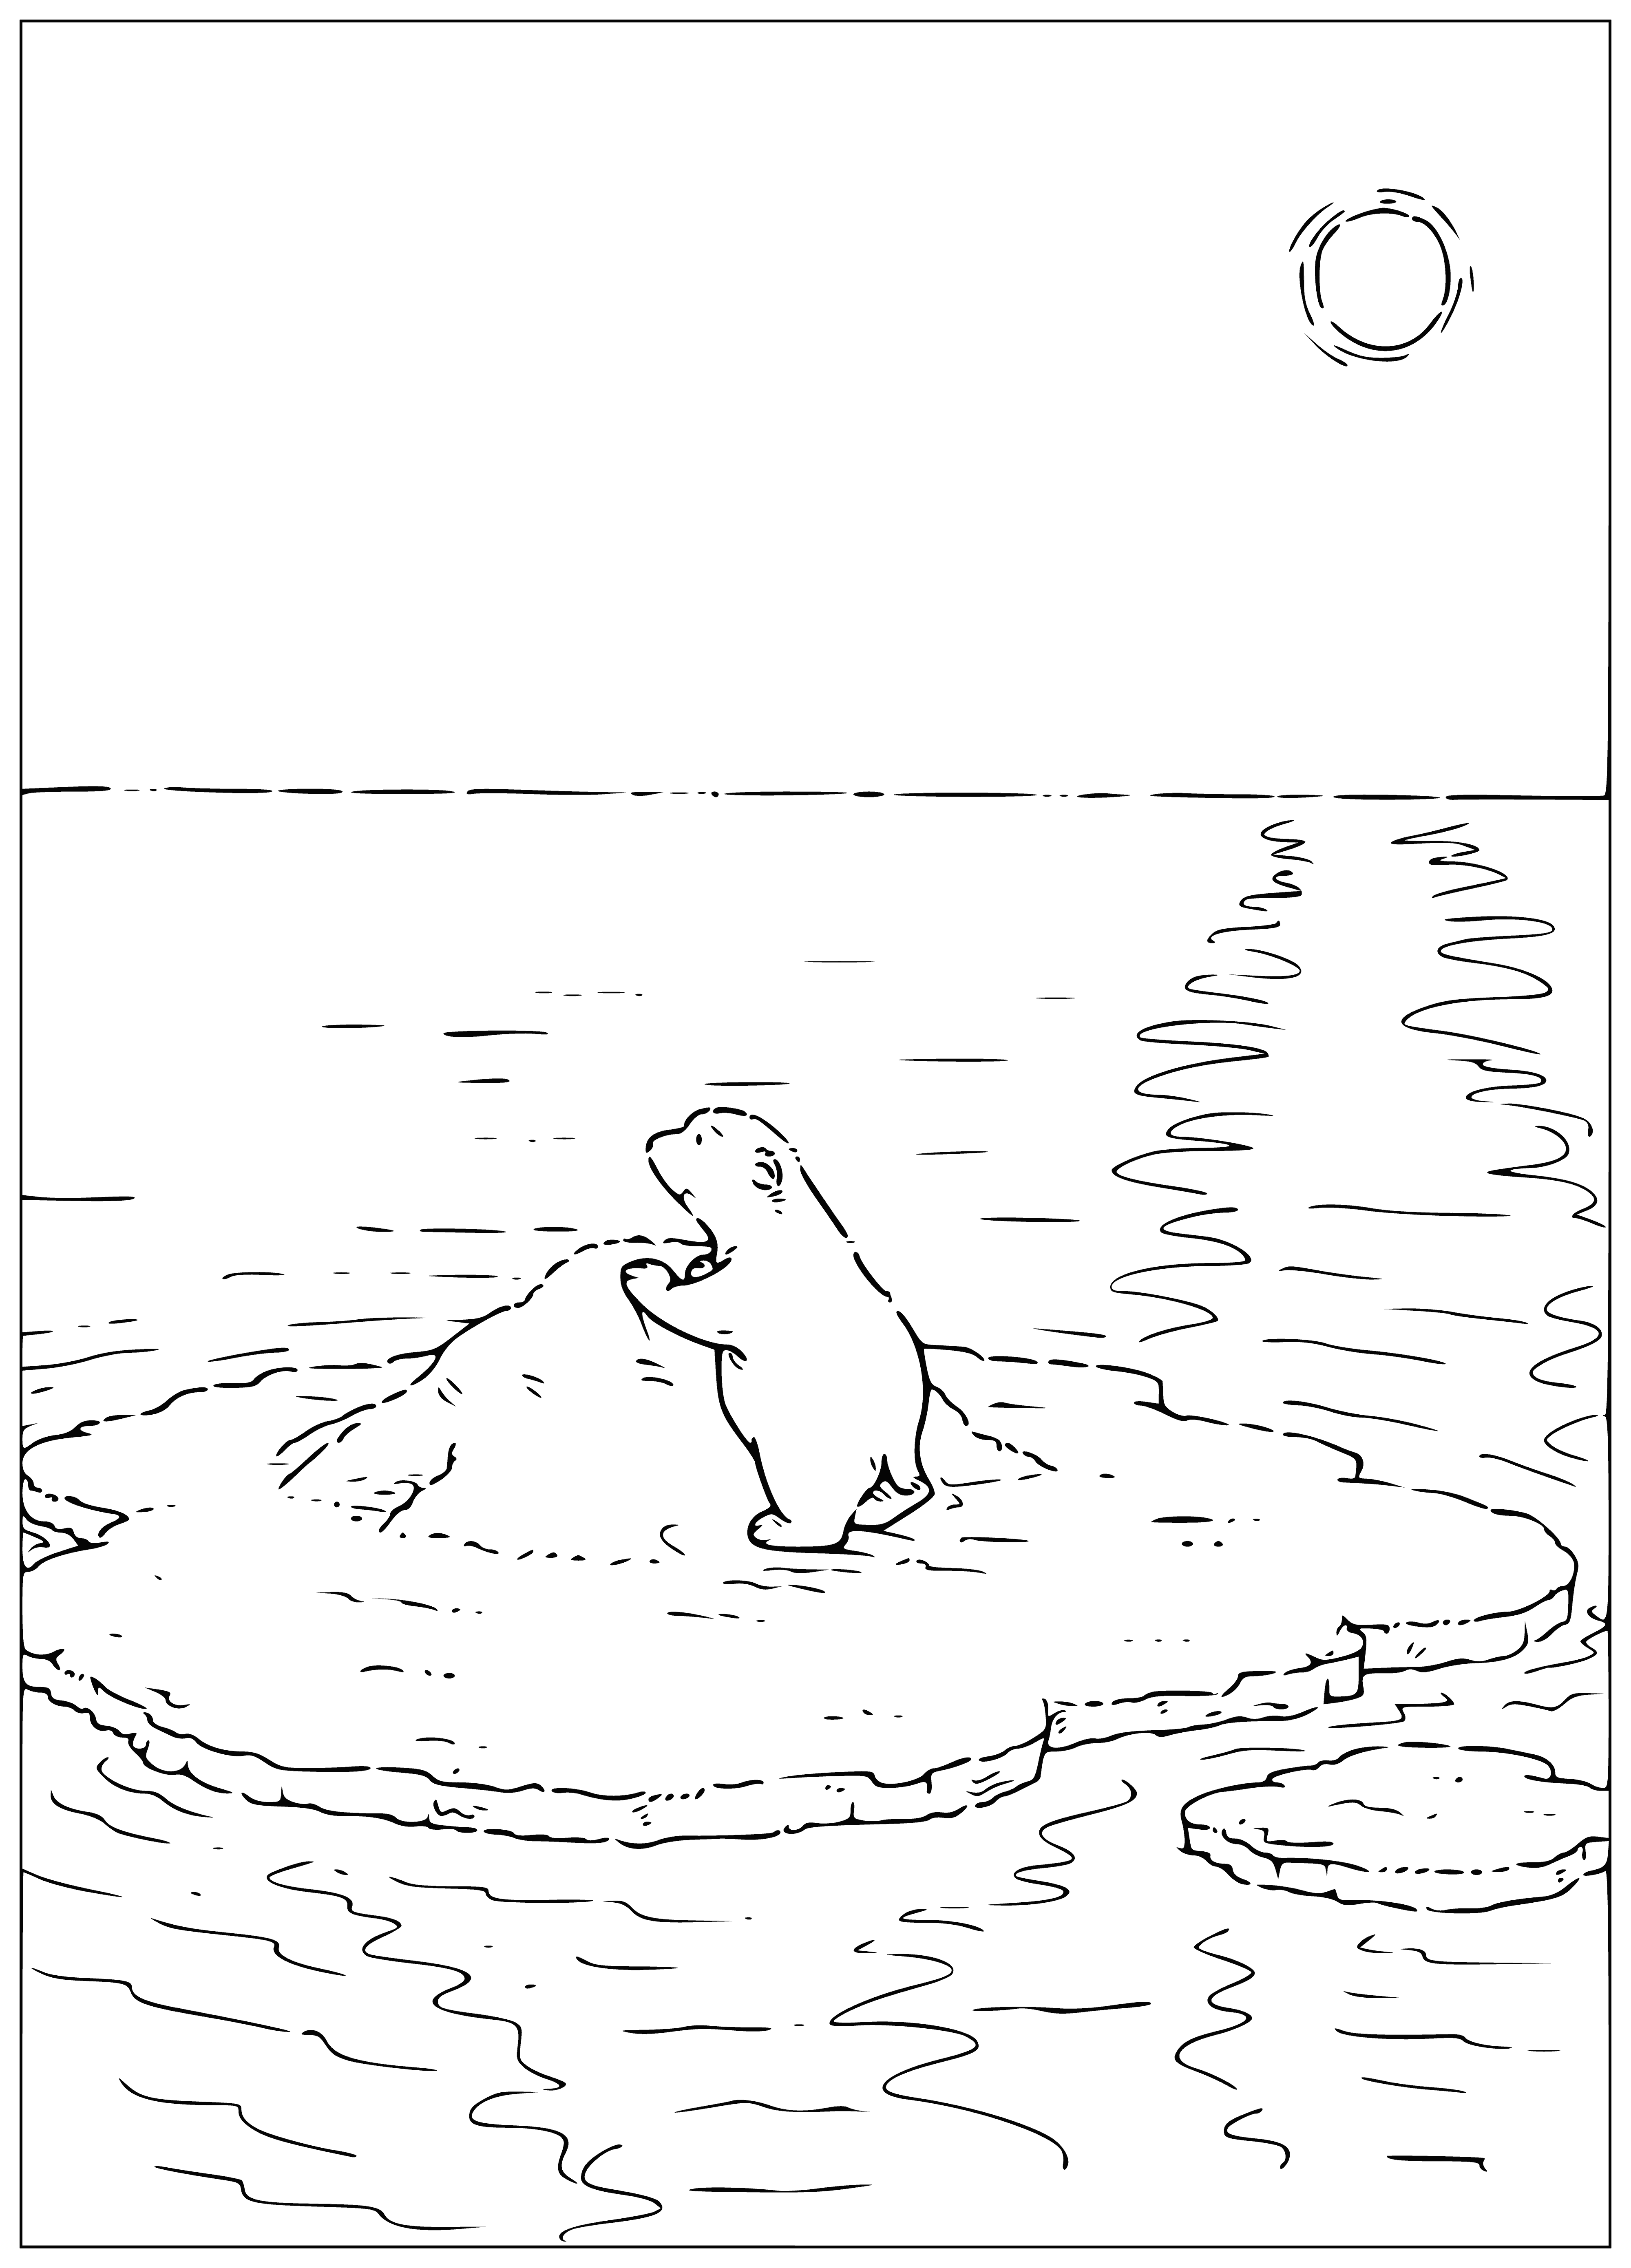 Alone on an ice floe coloring page